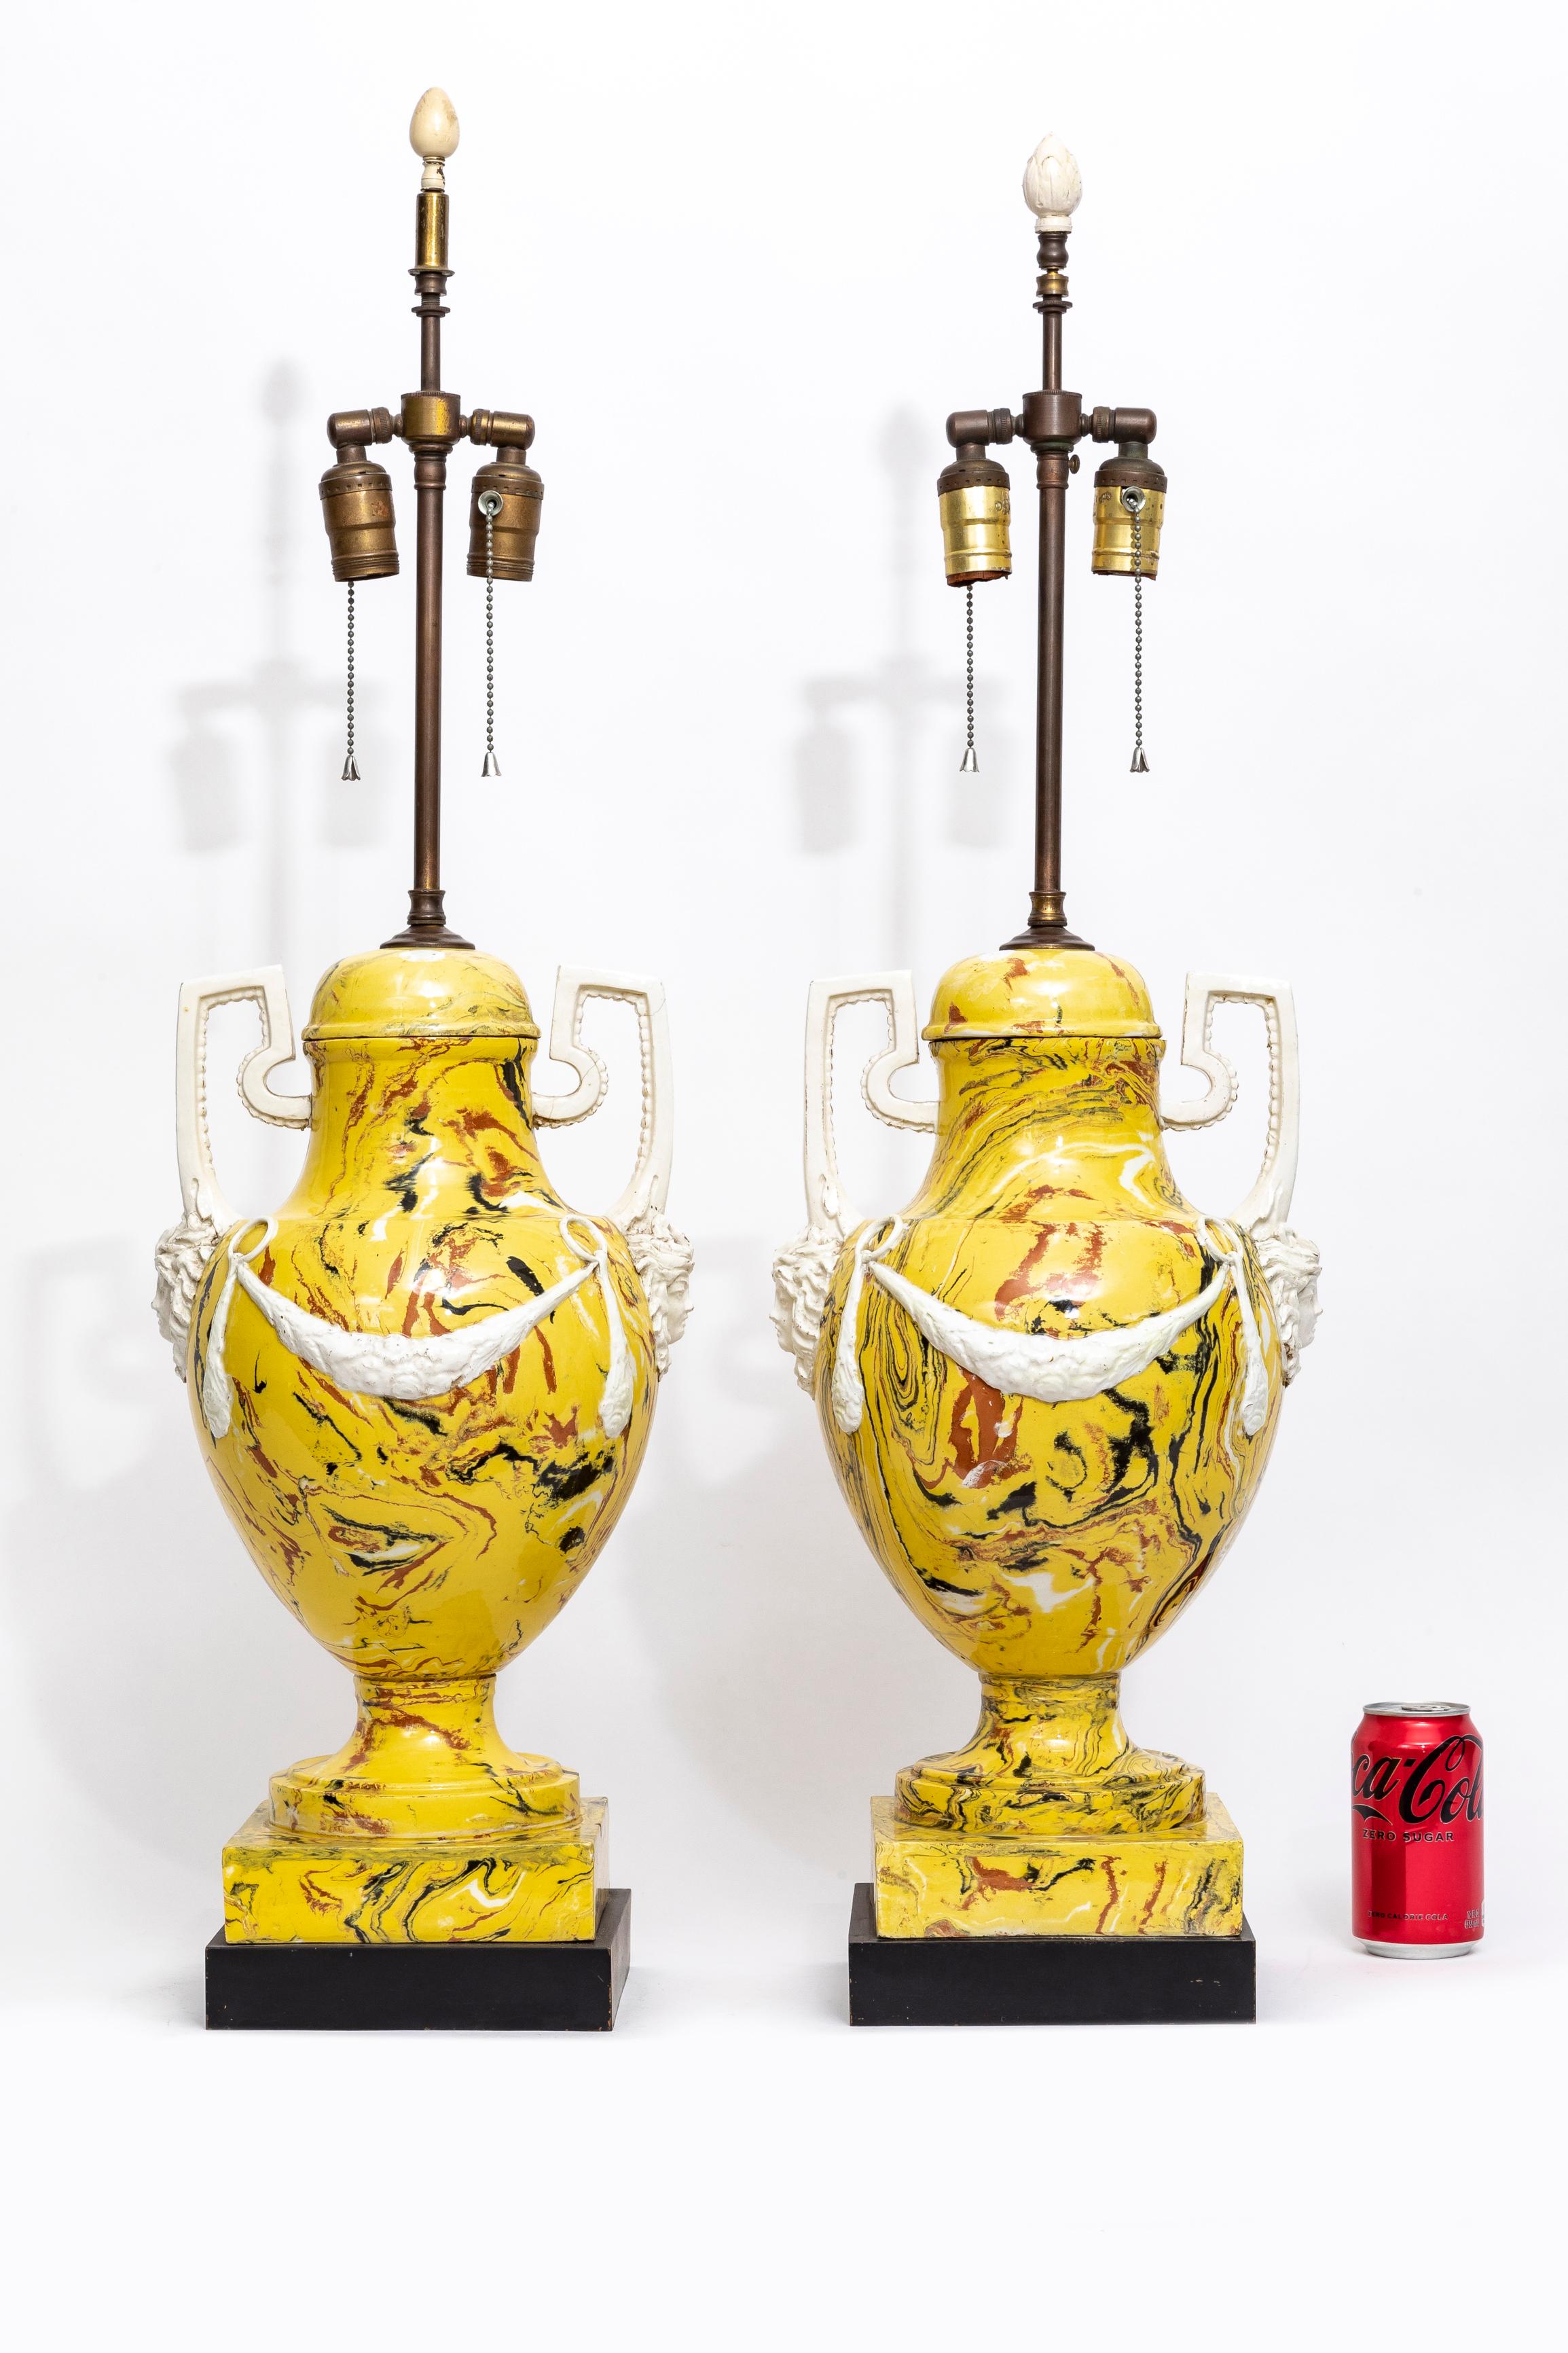 A Magnificent Pair of Italian Agateware Porcelain Lamps with Medusa Masks, Wreaths, and Handles.  The lamps are fashioned in the neoclassical style and feature a brightly-contrasted yellow and brown marbling. Atop the solid dark brown plinths stand